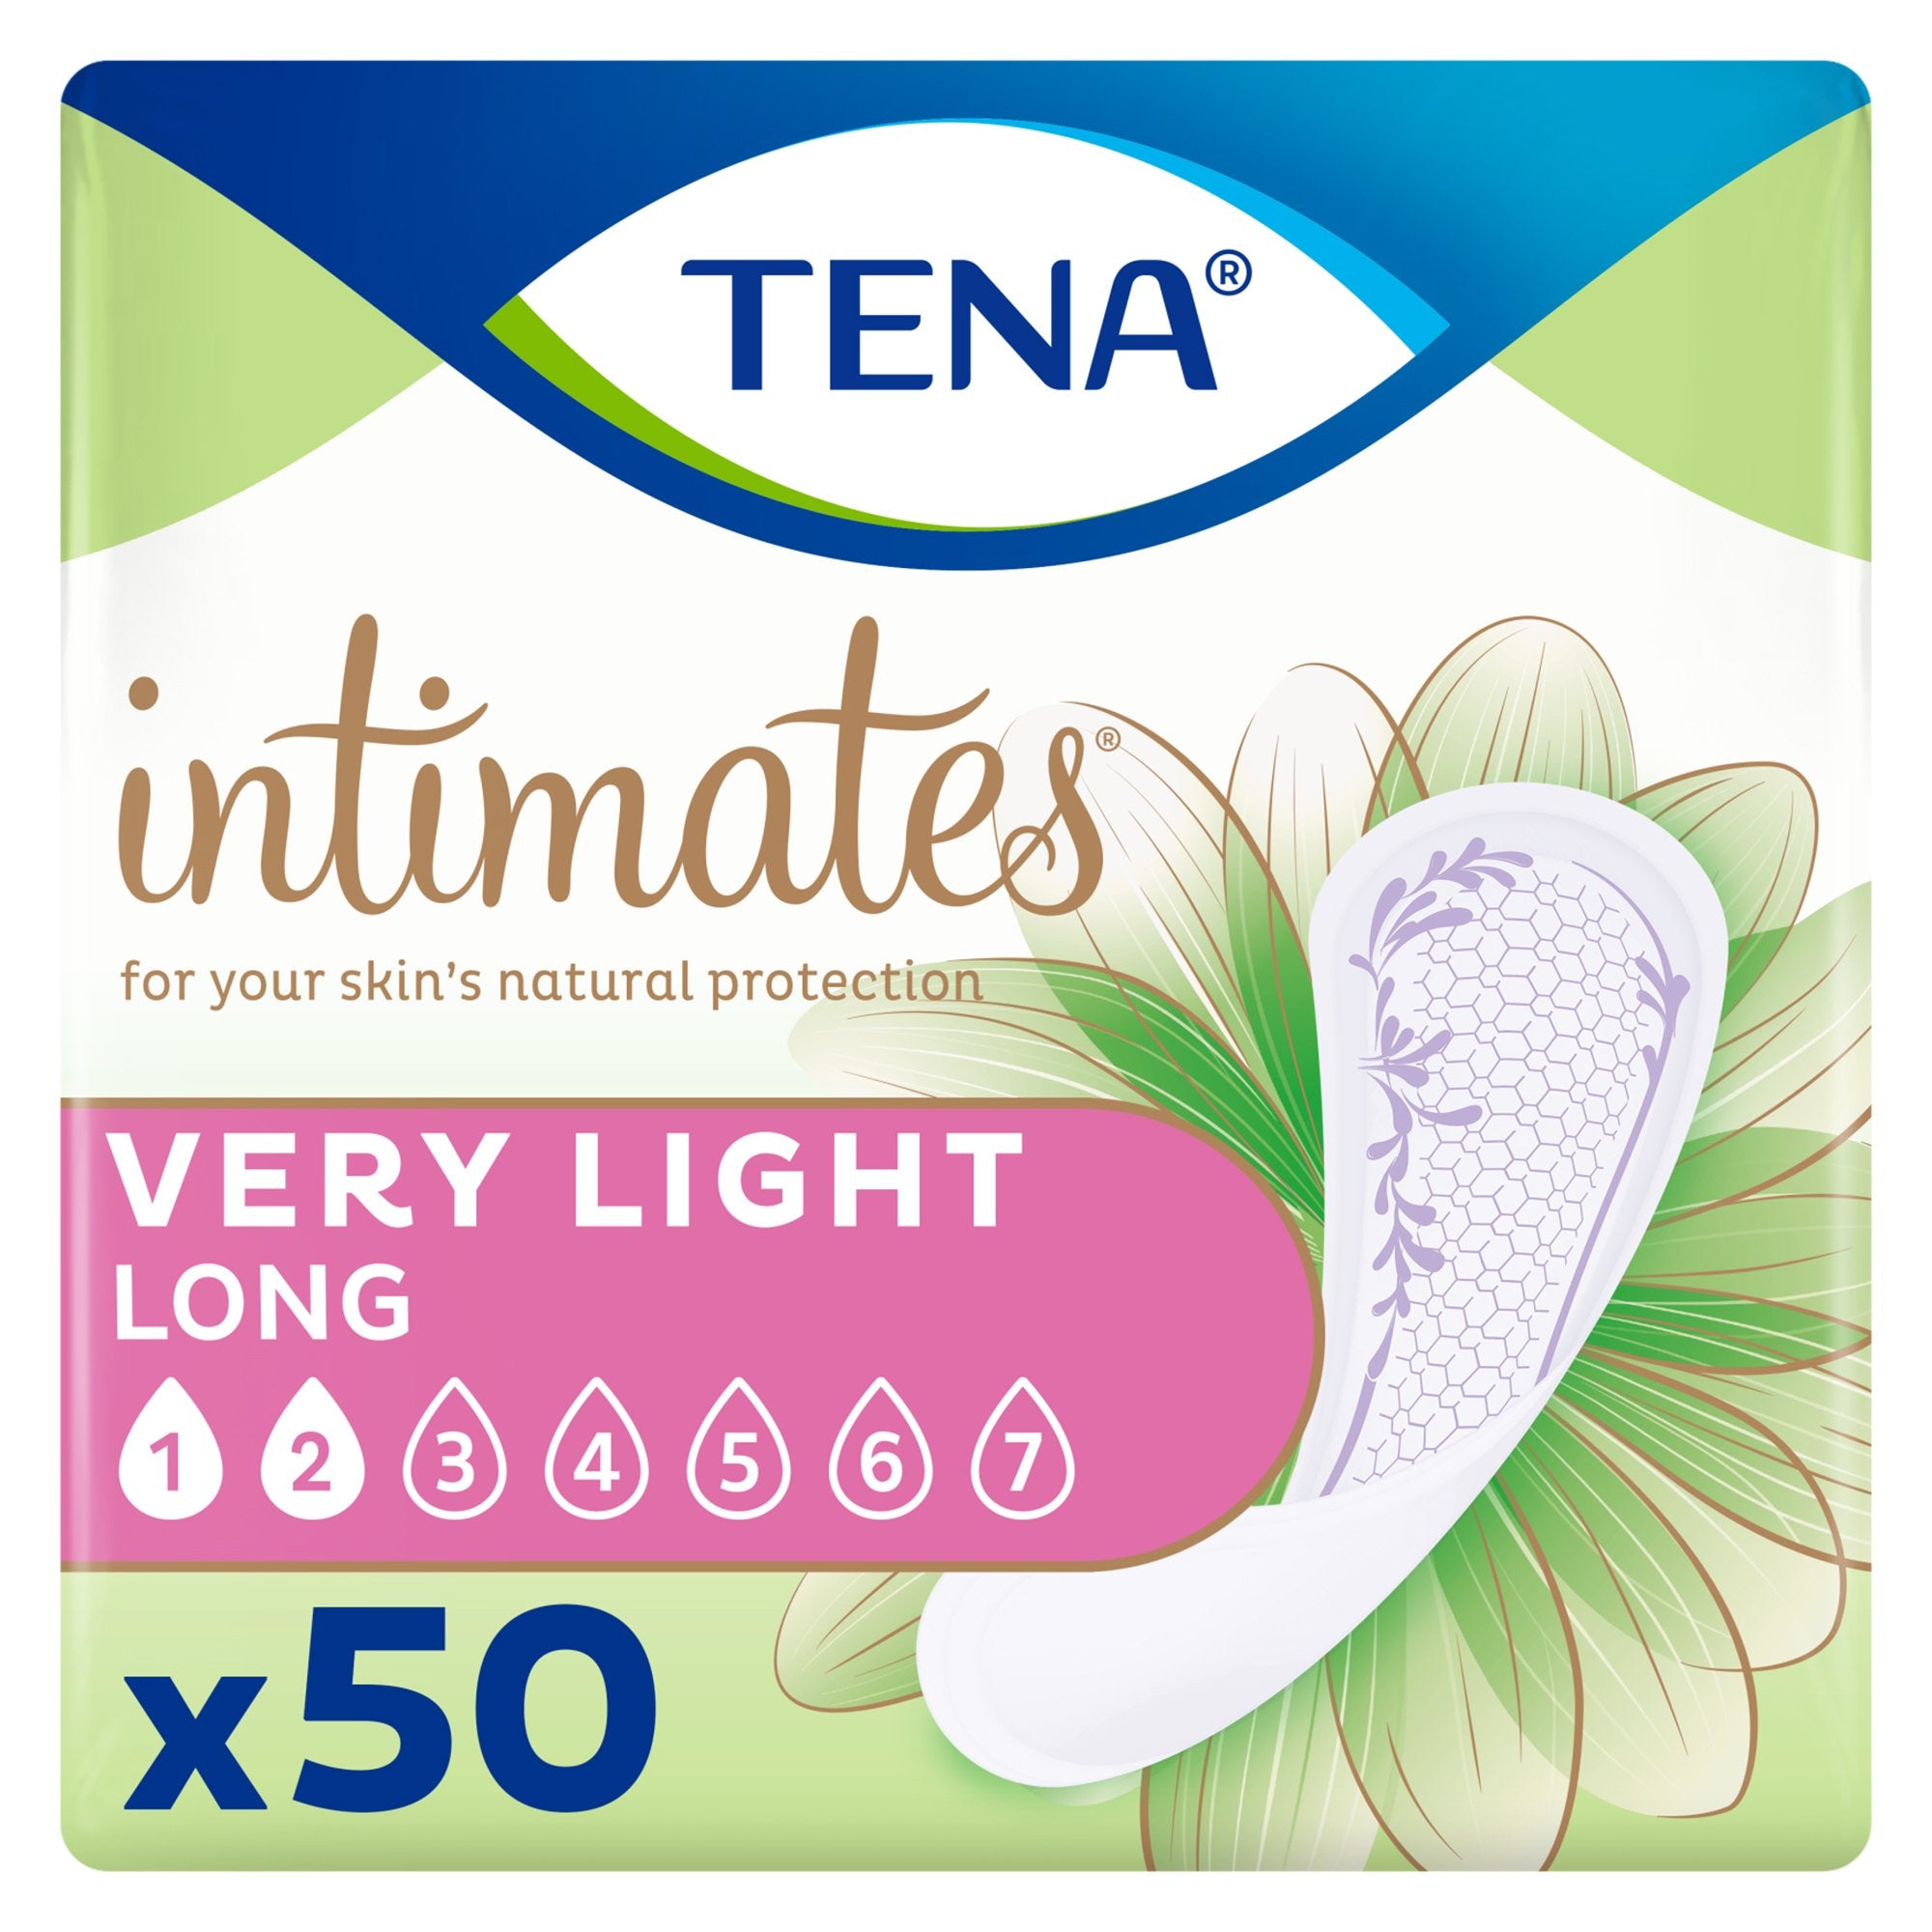 Bladder Control Pad TENA Intimates Very Light 9 Inch Length Light Absorbency Dry-Fast Core One Size Fits Most